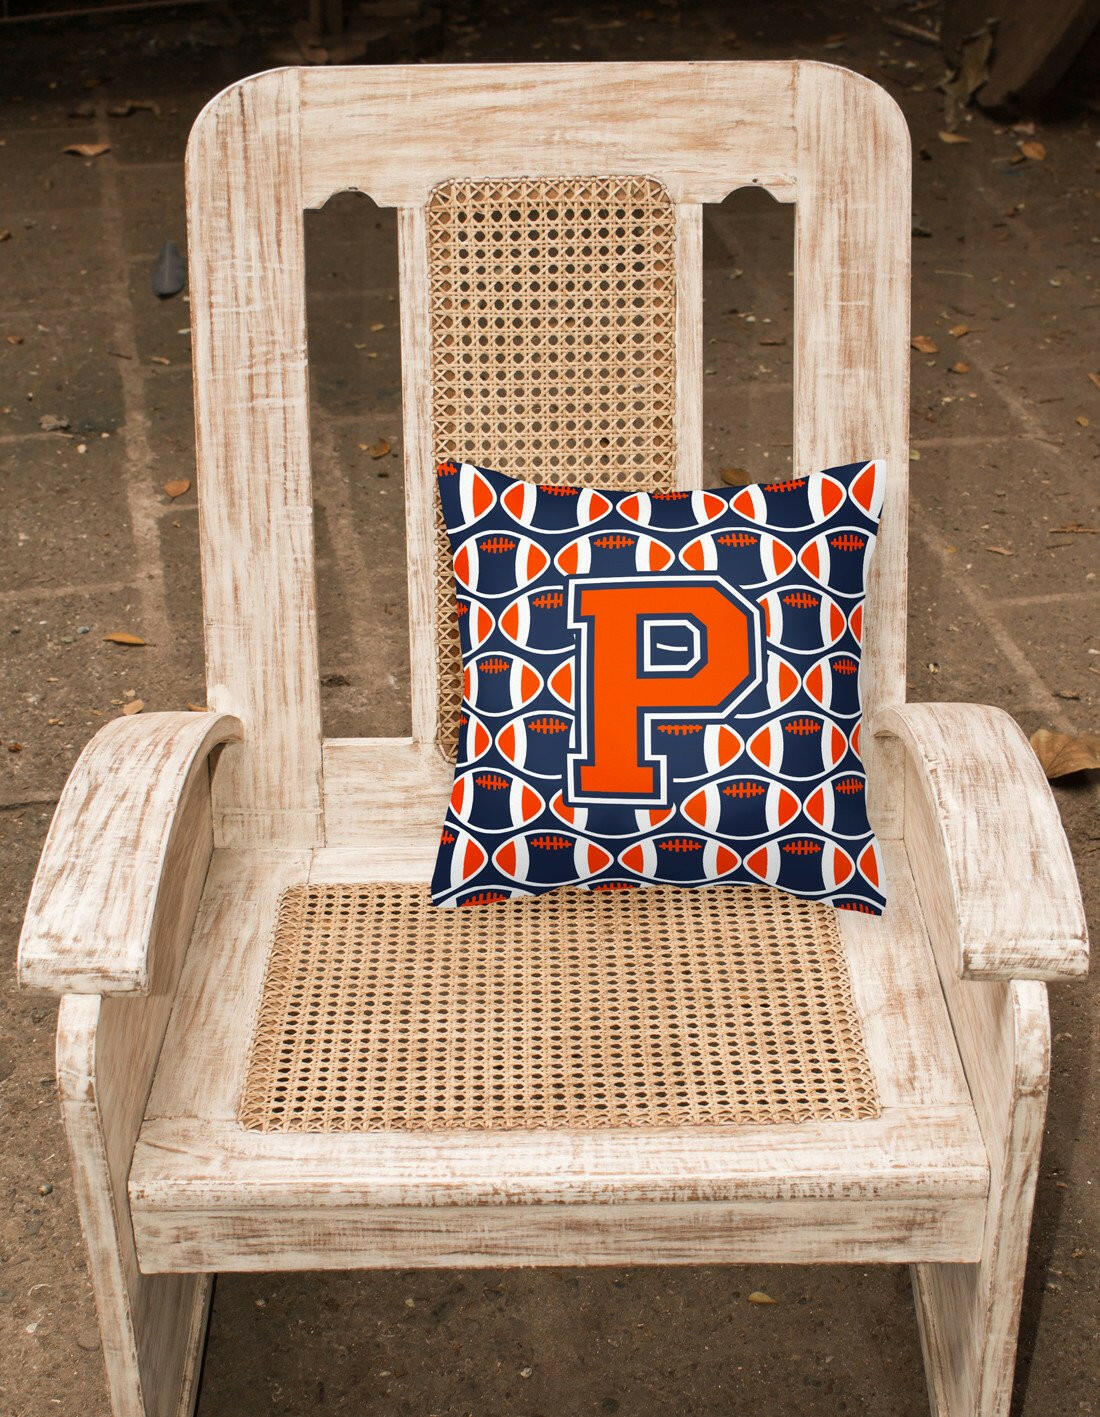 Letter P Football Orange, Blue and white Fabric Decorative Pillow CJ1066-PPW1414 by Caroline's Treasures